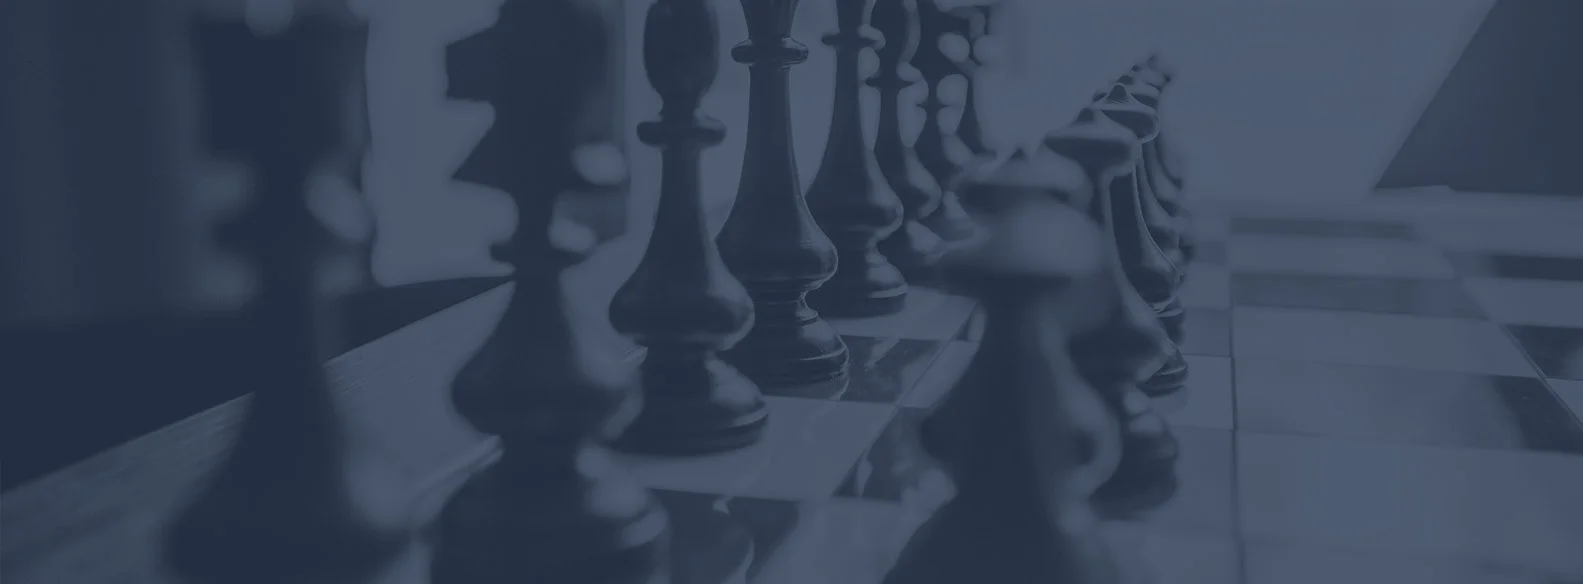 Chess pieces on a chess board representing making your next strategic move with real estate due diligence